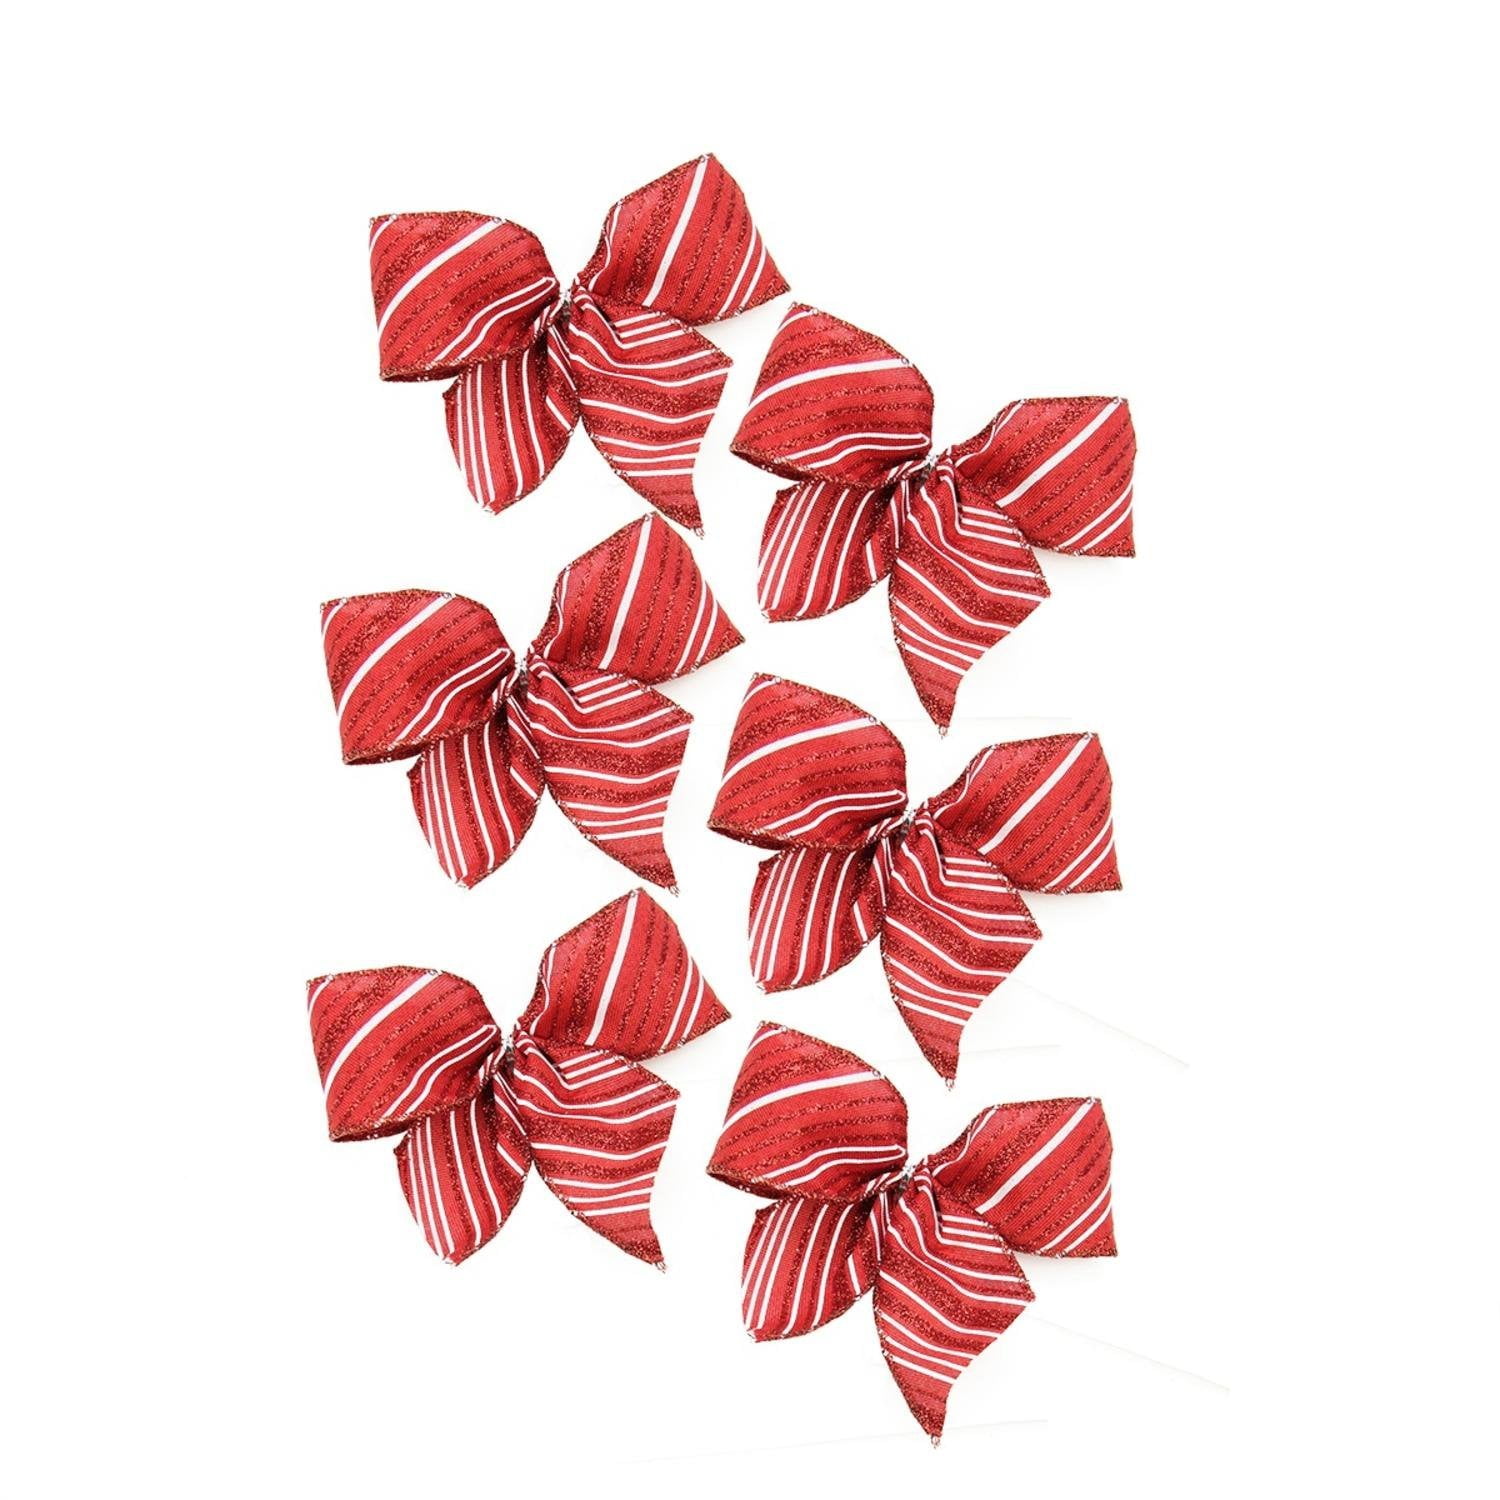 2 RED & WHITE CANDY STRIPED BOW DECORATION 